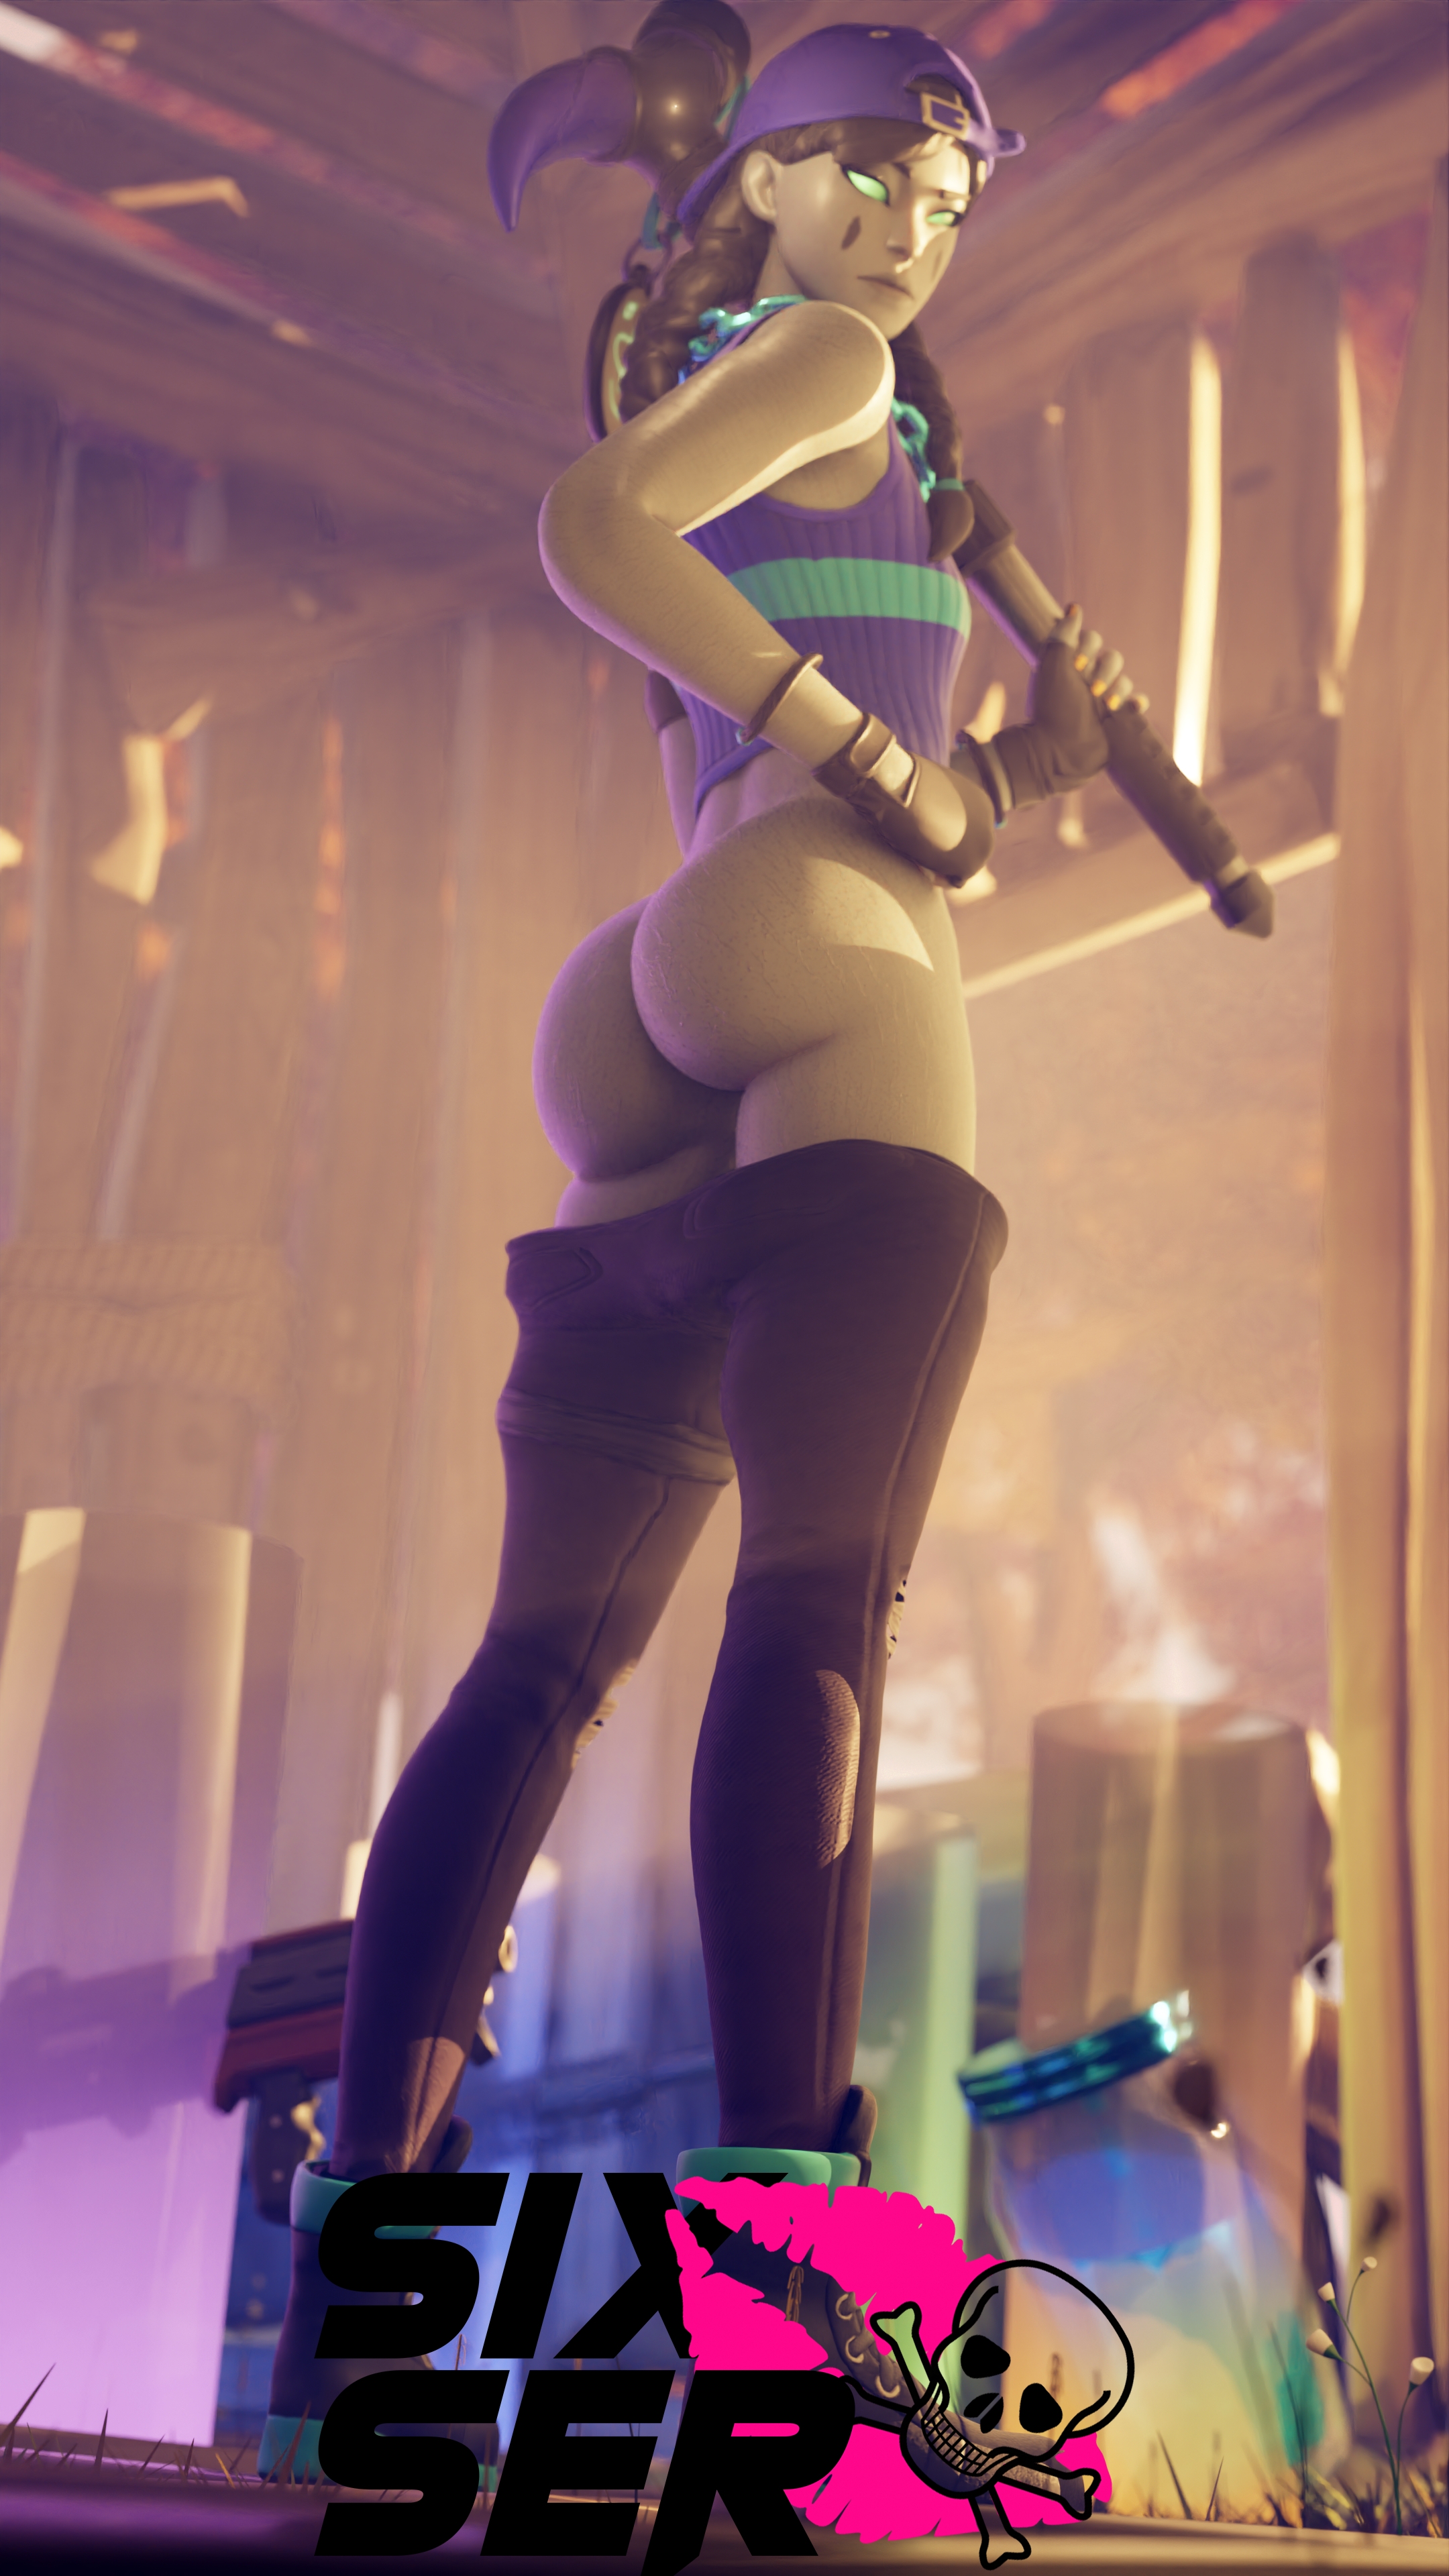 Adrenaline in her soul  she is ready to start the show Aura (fortnite) Fortnite Big Ass 2